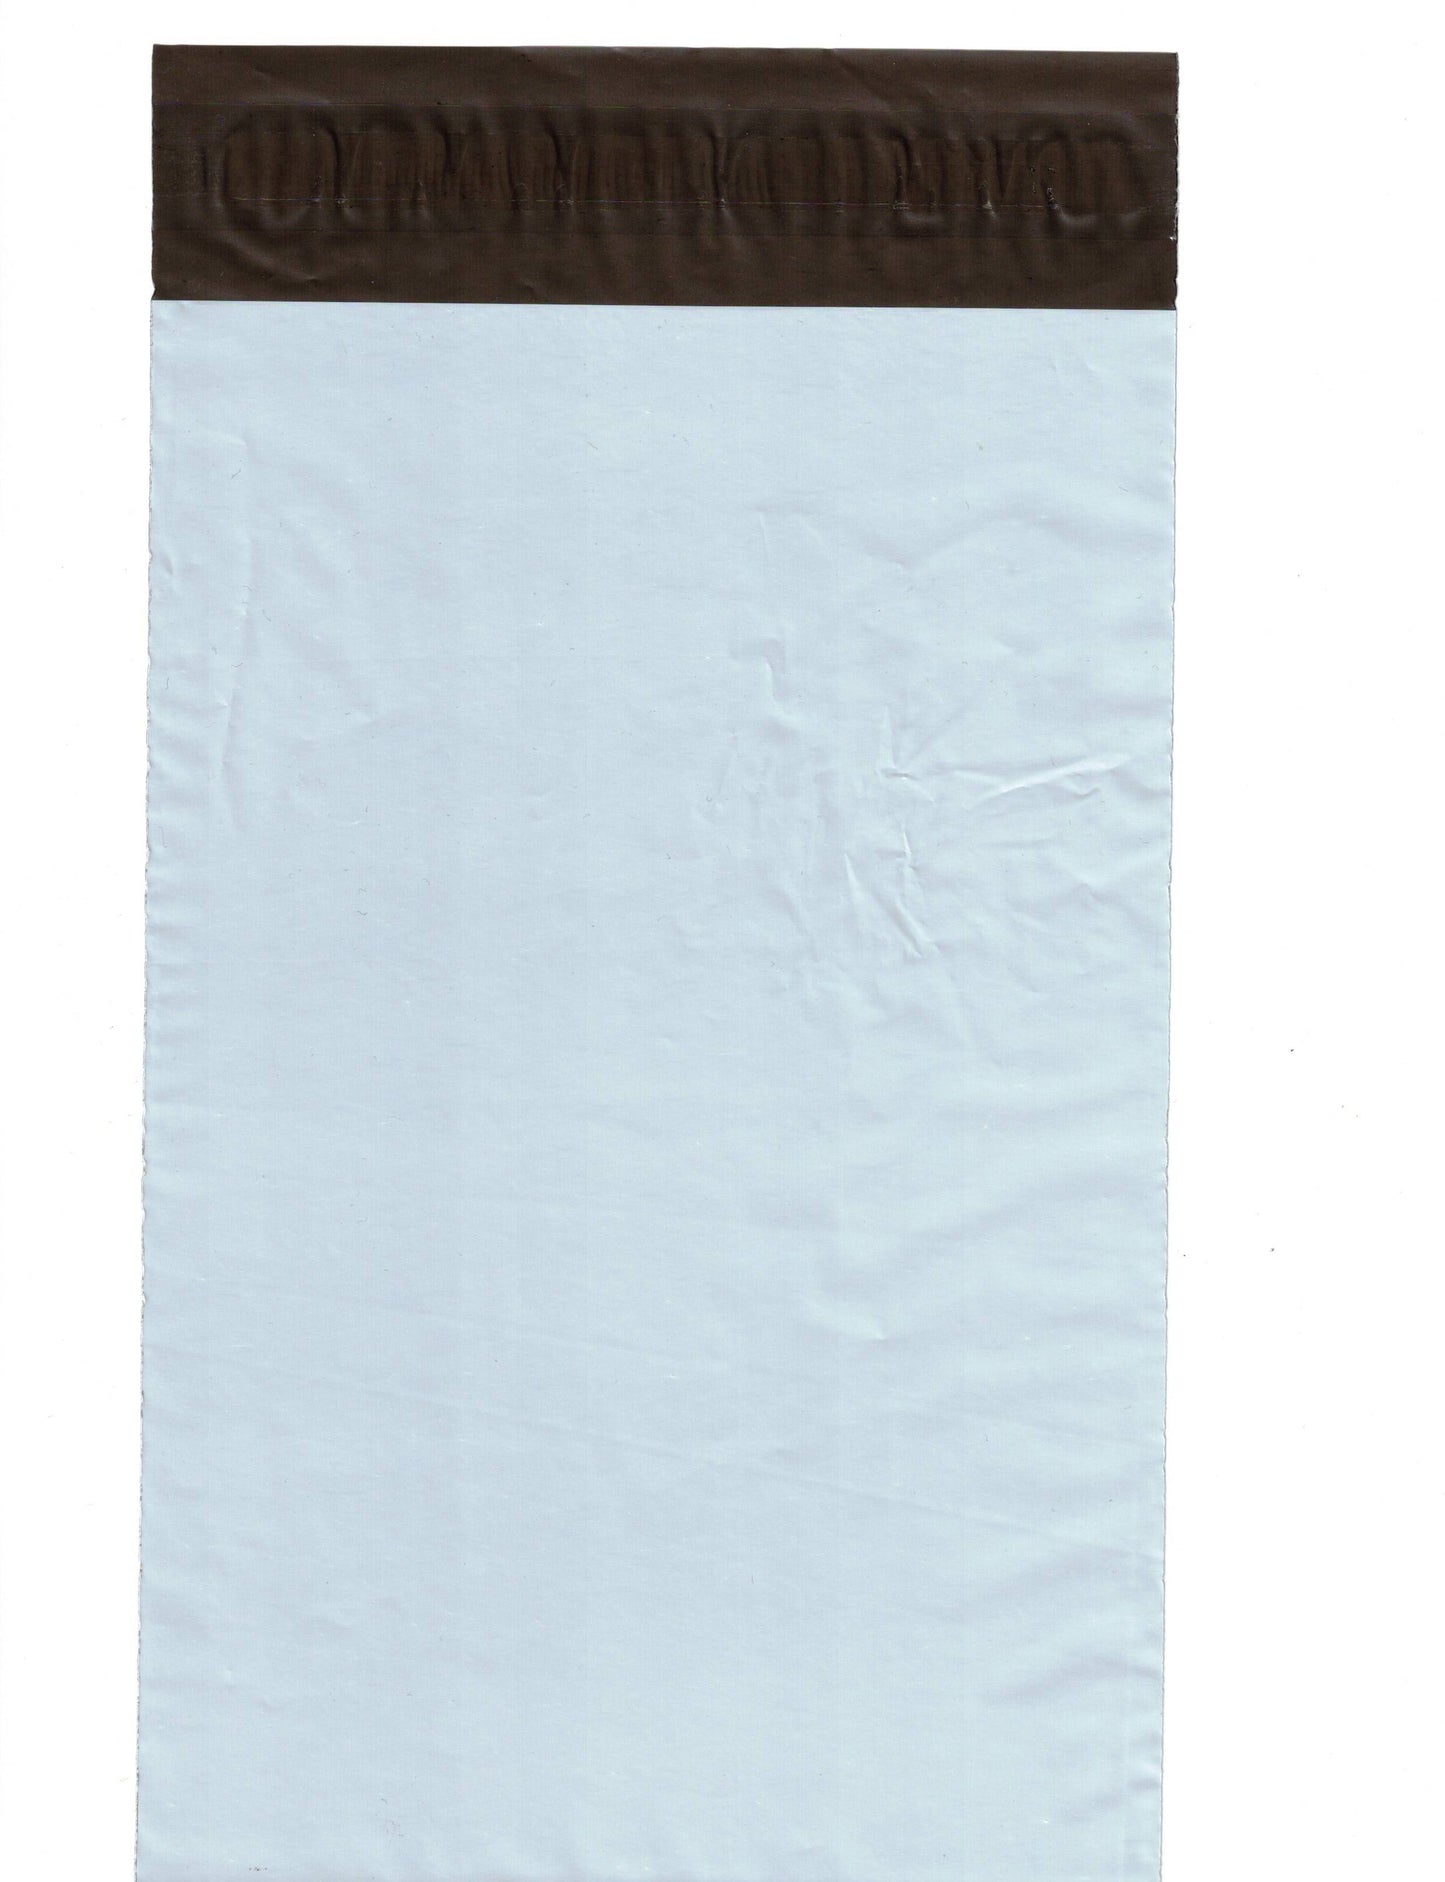 10 Pack 6"x9" Poly Mailer, Sets of 100 (White/Gray) - Self Sealing Mailing Bag Strong & Opaque